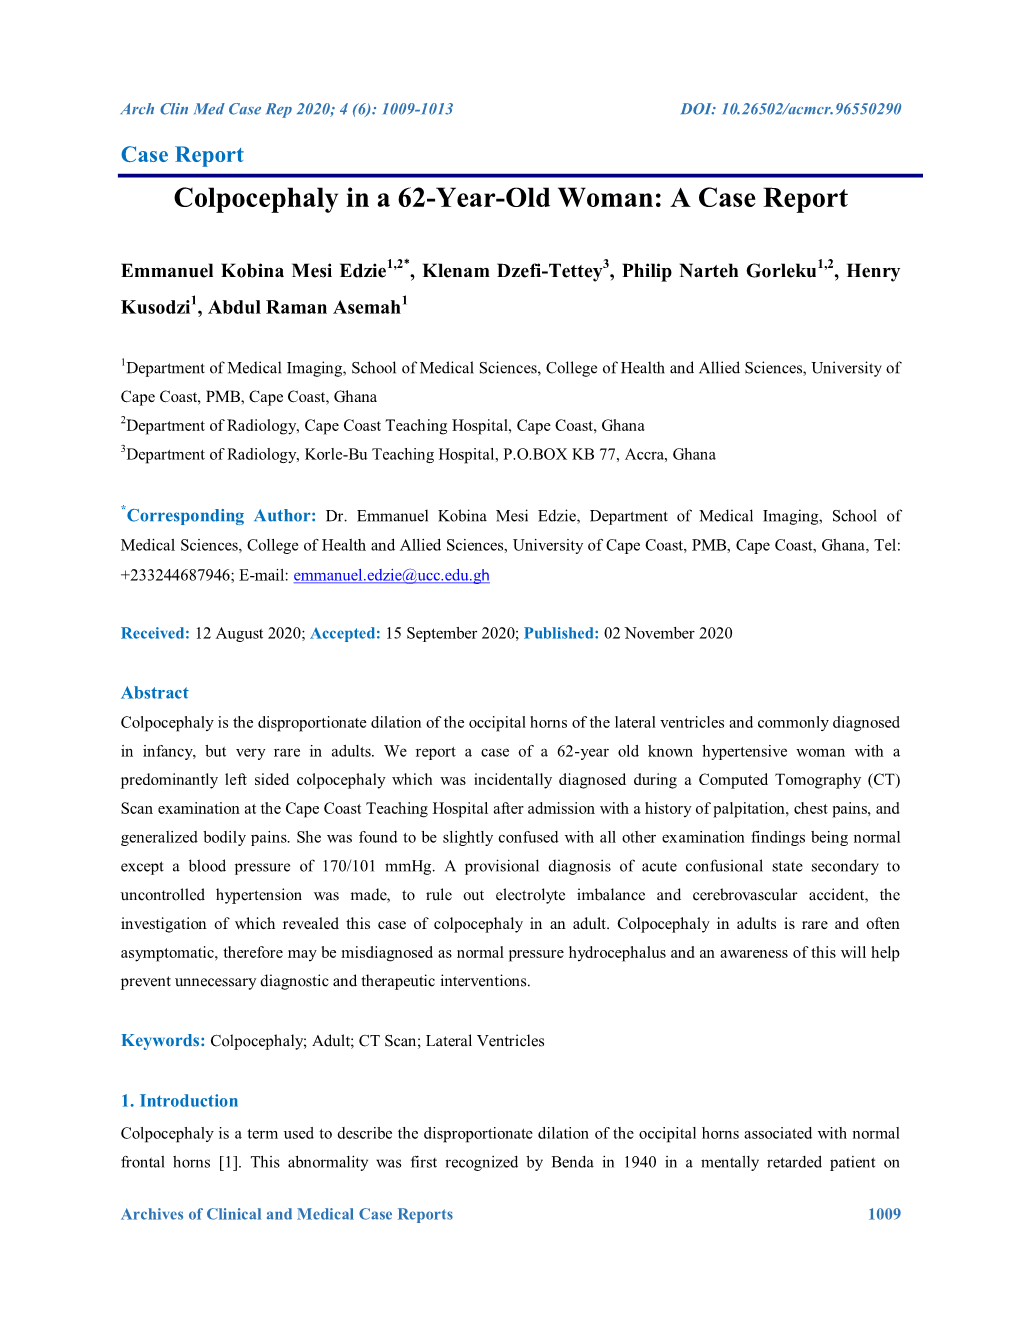 Colpocephaly in a 62-Year Old Woman: a Case Report